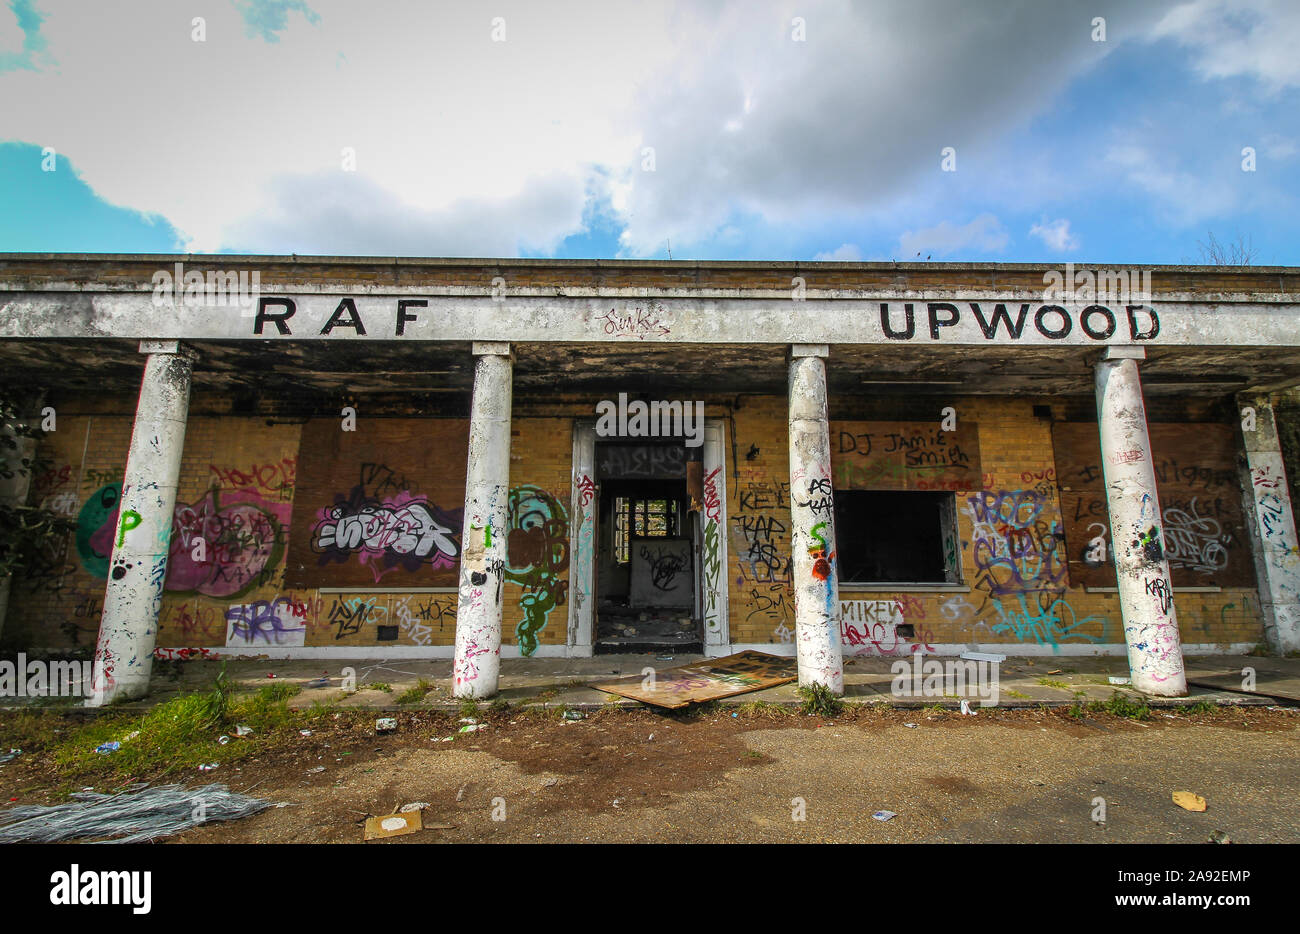 Front Shot of Abandoned Building at RAF Upwood - Currently Being Pulled Down and Demolished for New Homes to be Built - Cambridge, UK Stock Photo